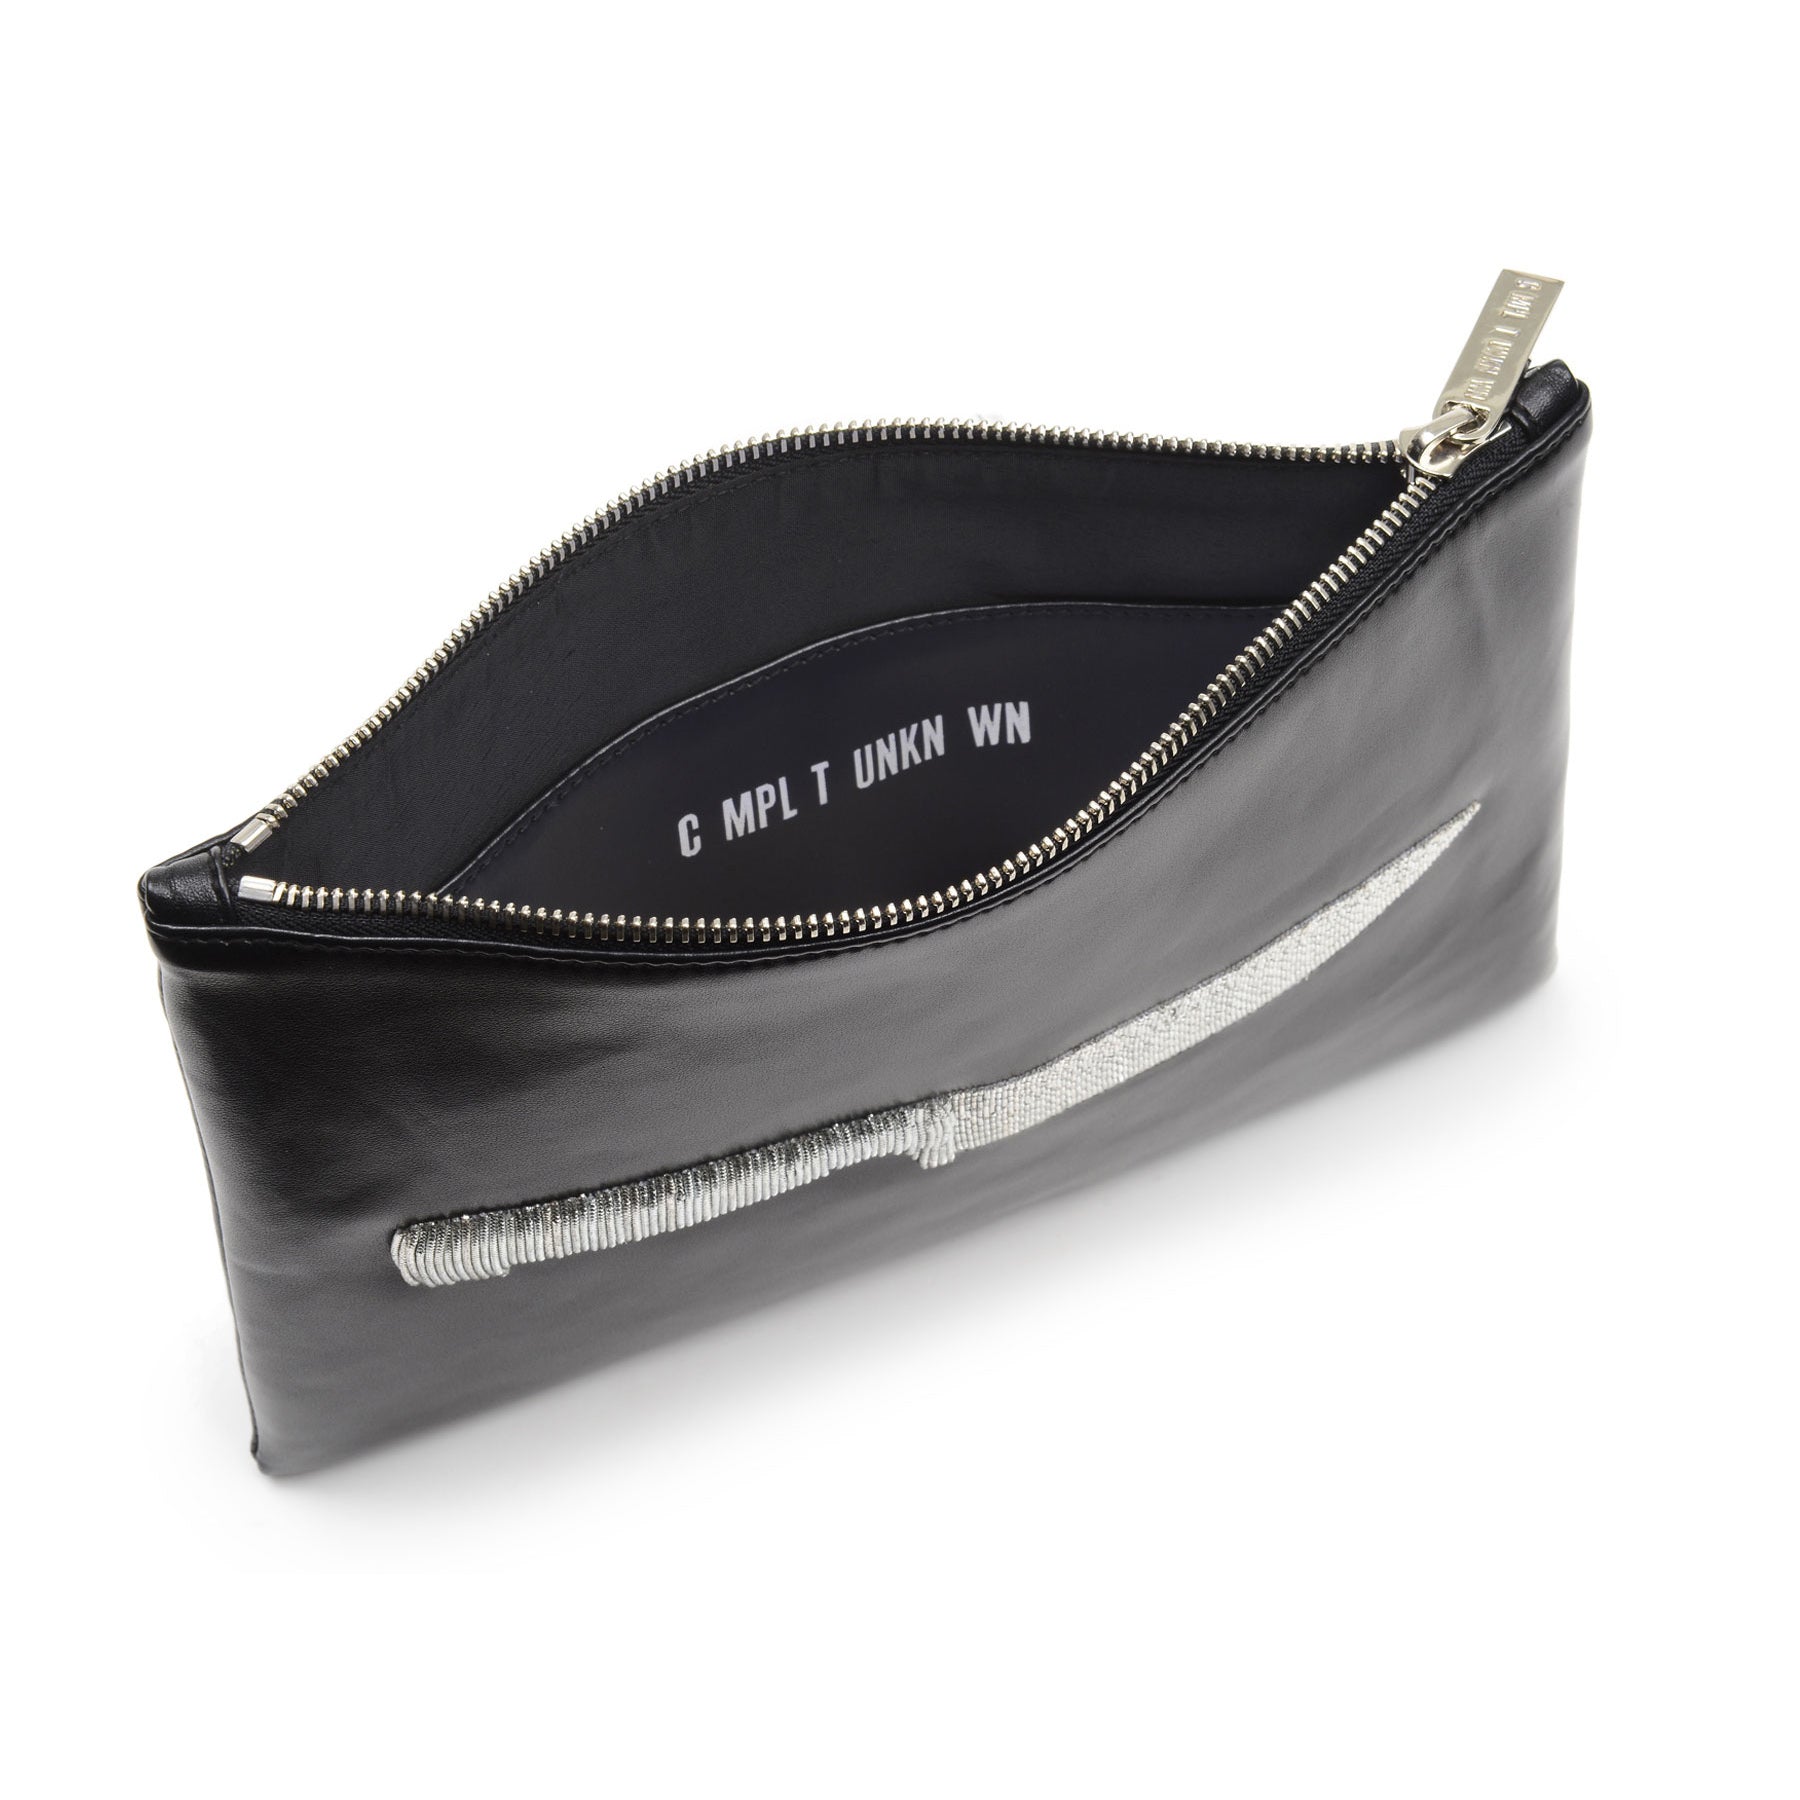 KNIFE EMBROIDERED CLUTCH BAG